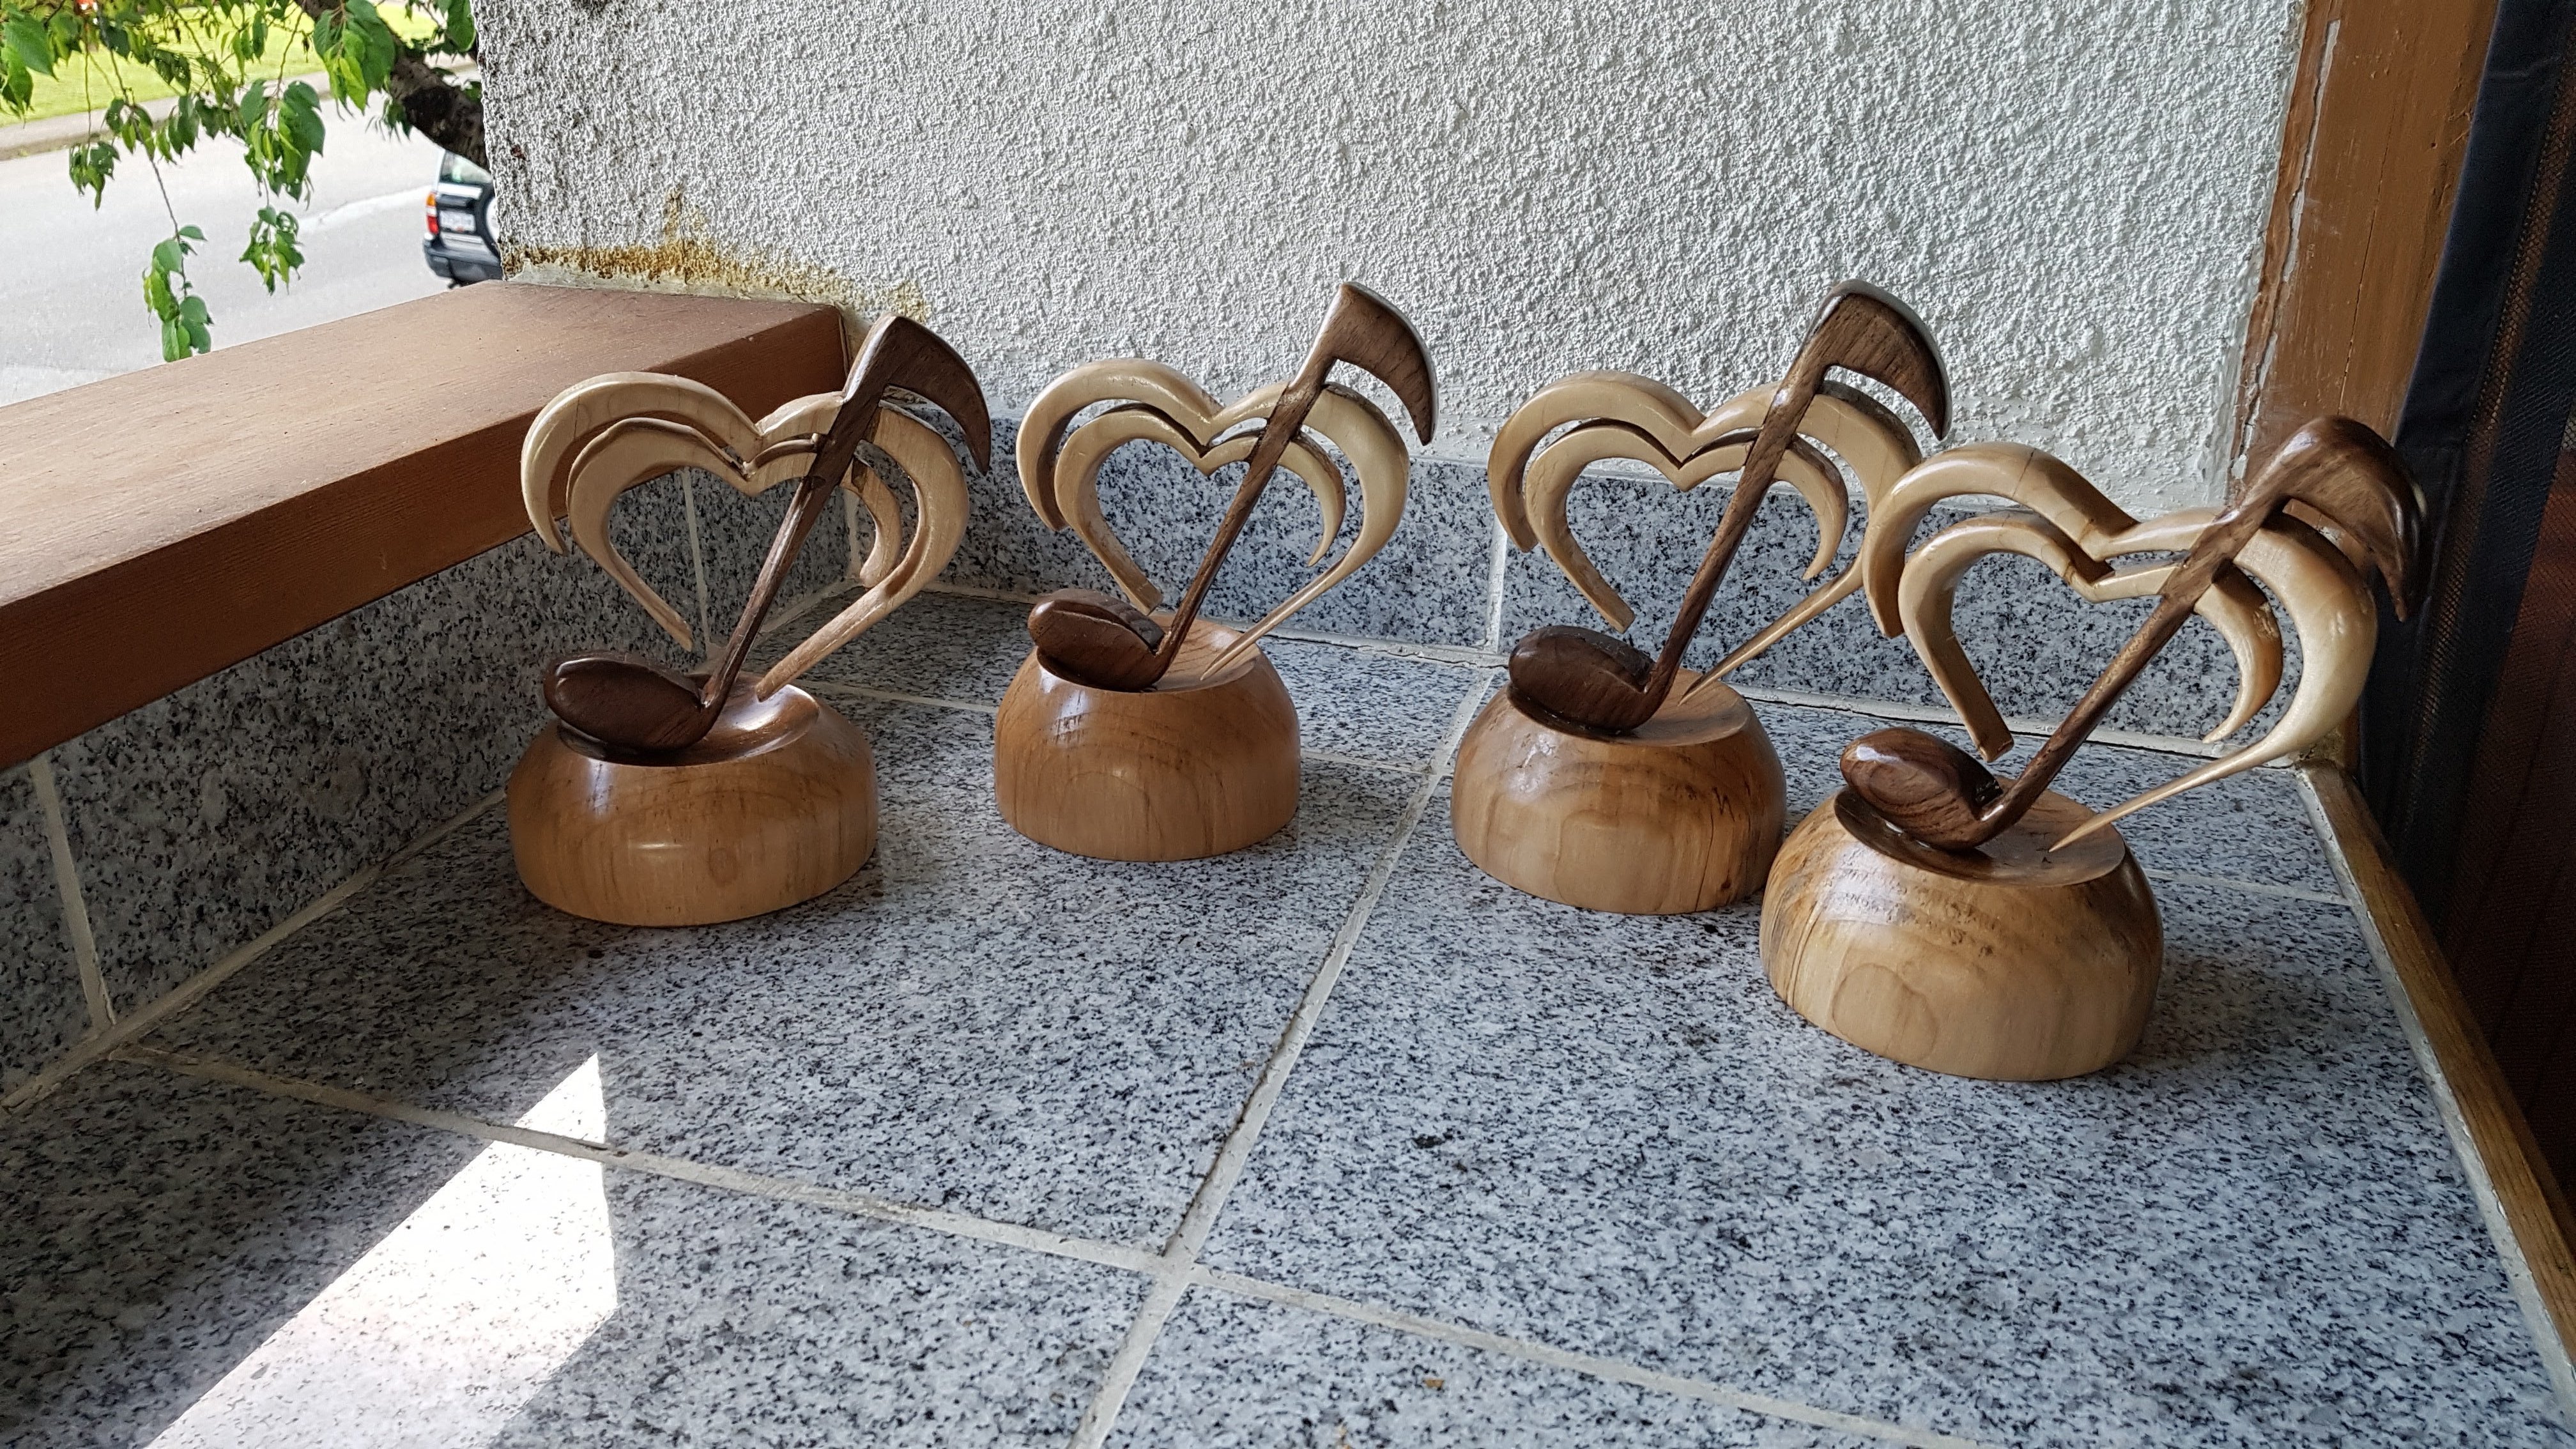 Completed music trophies